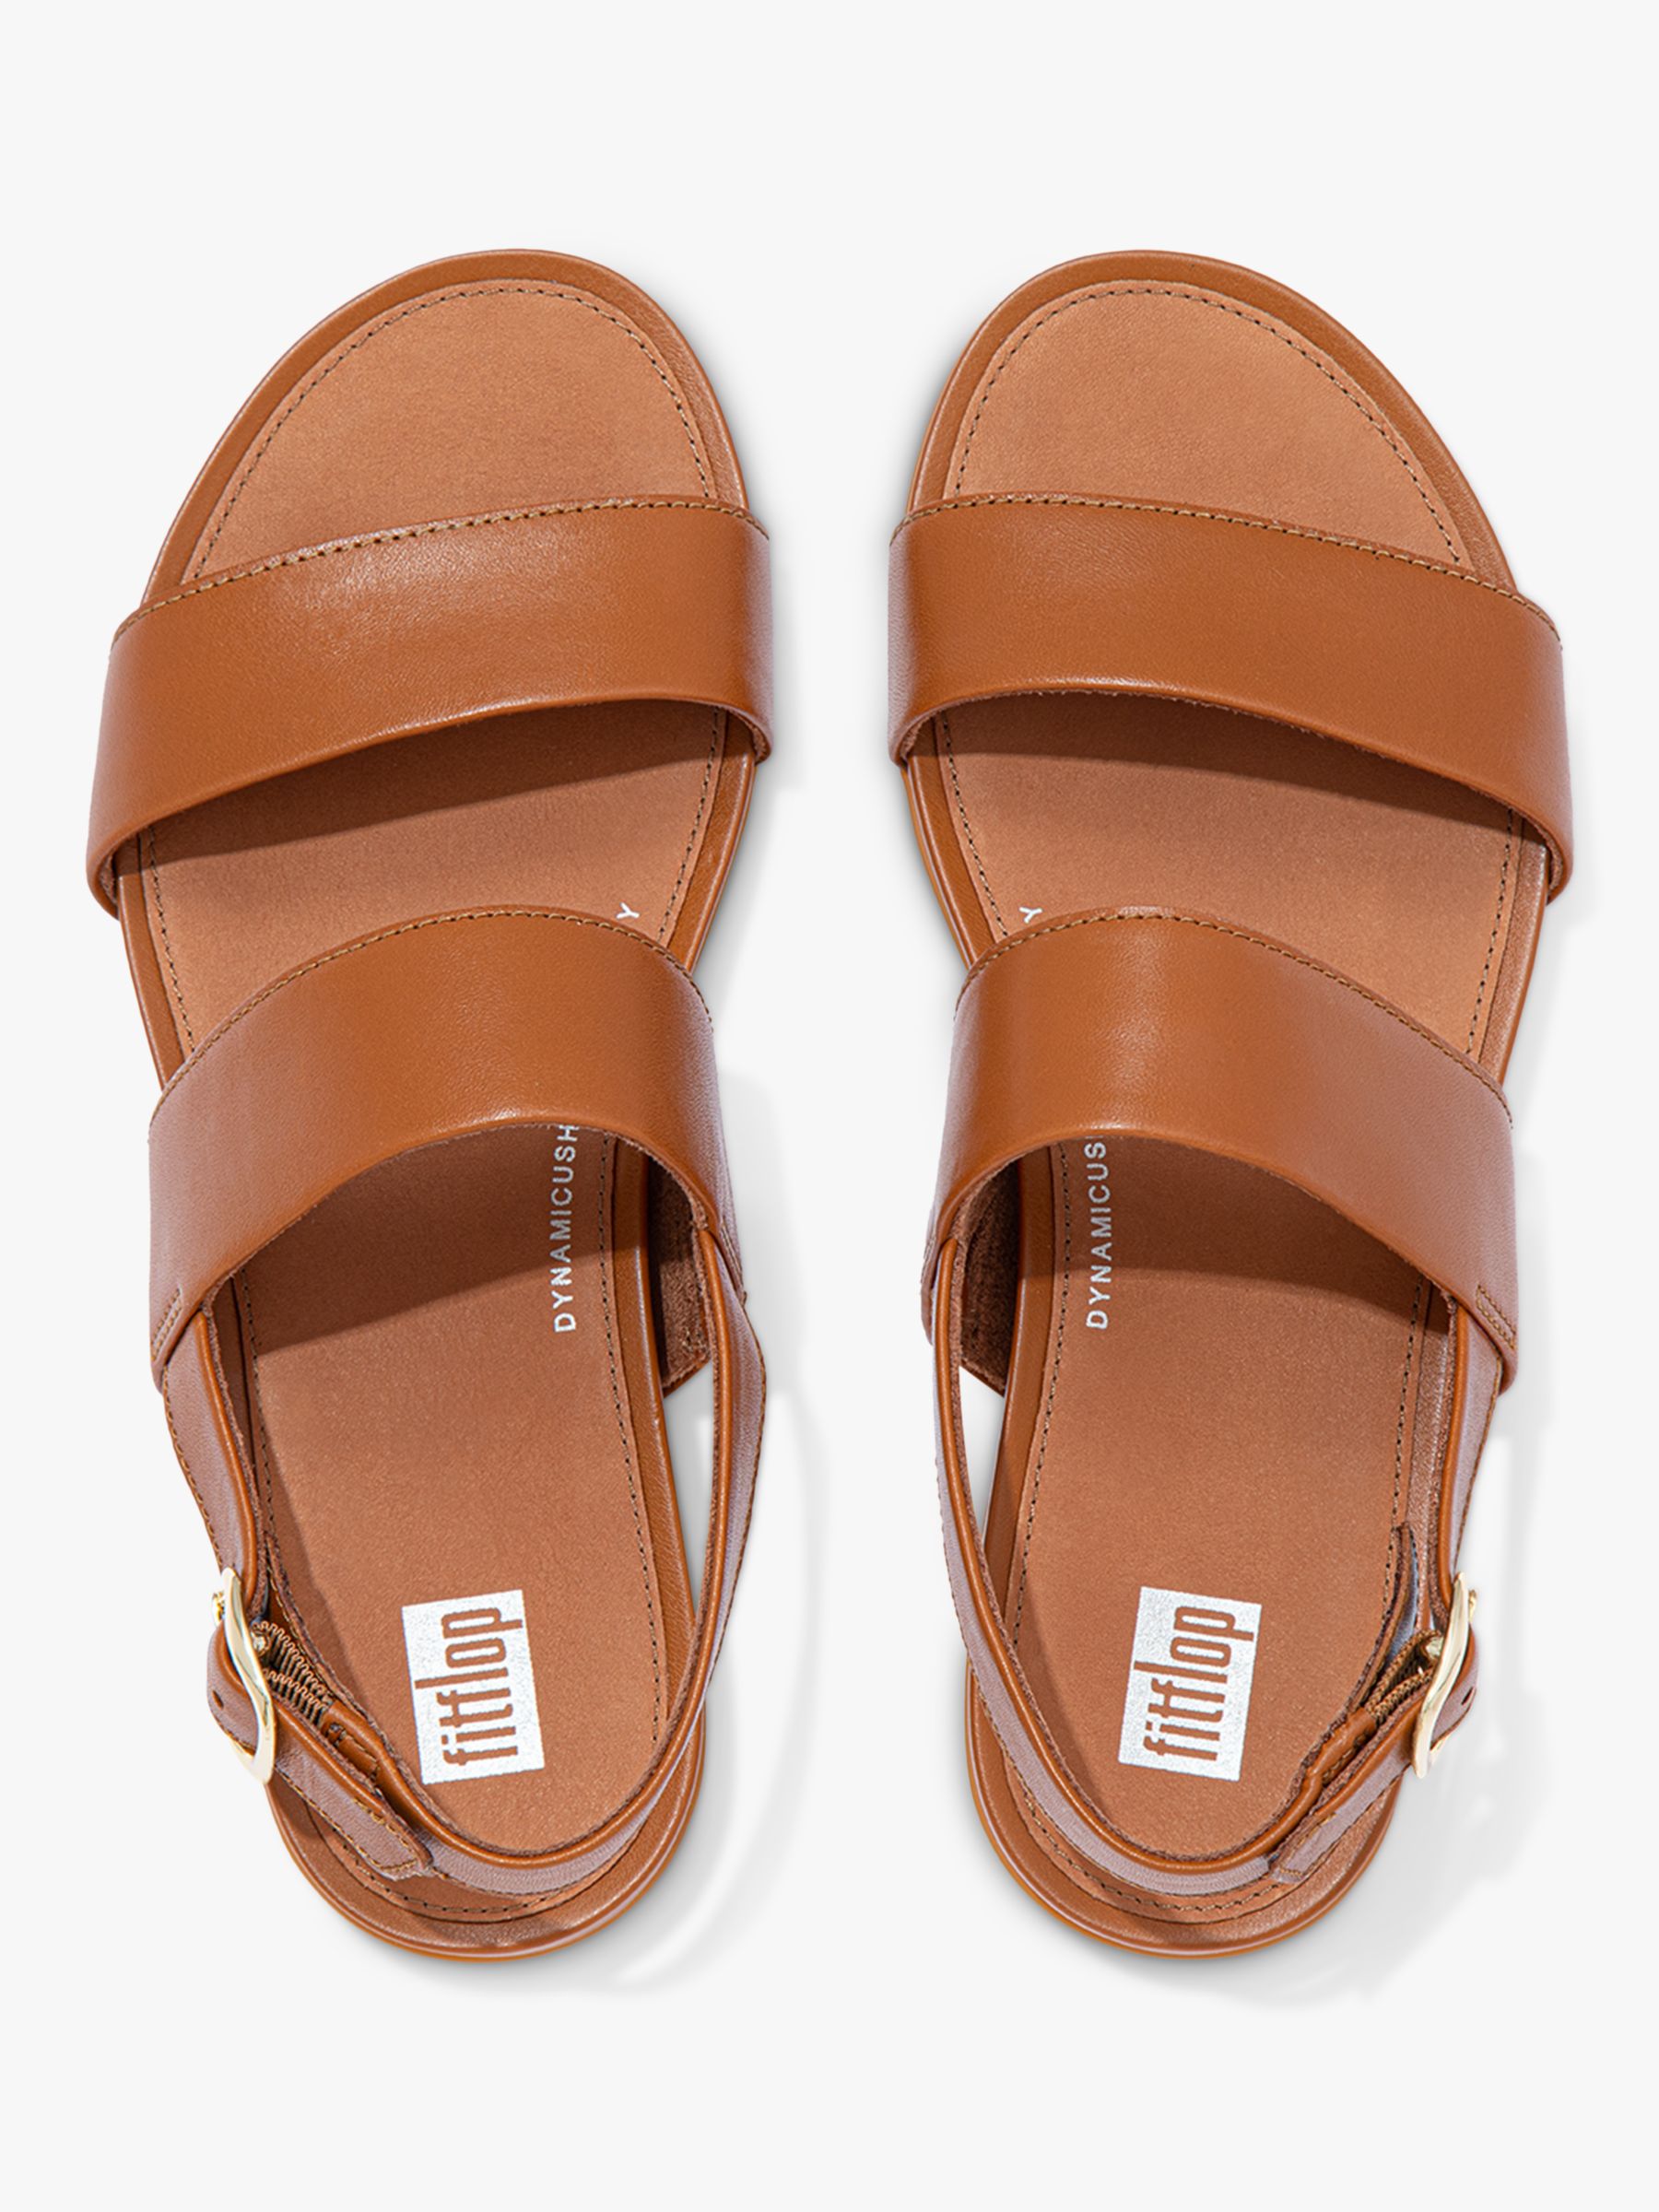 Buy FitFlop Gracie Leather Double Strap Sandals Online at johnlewis.com